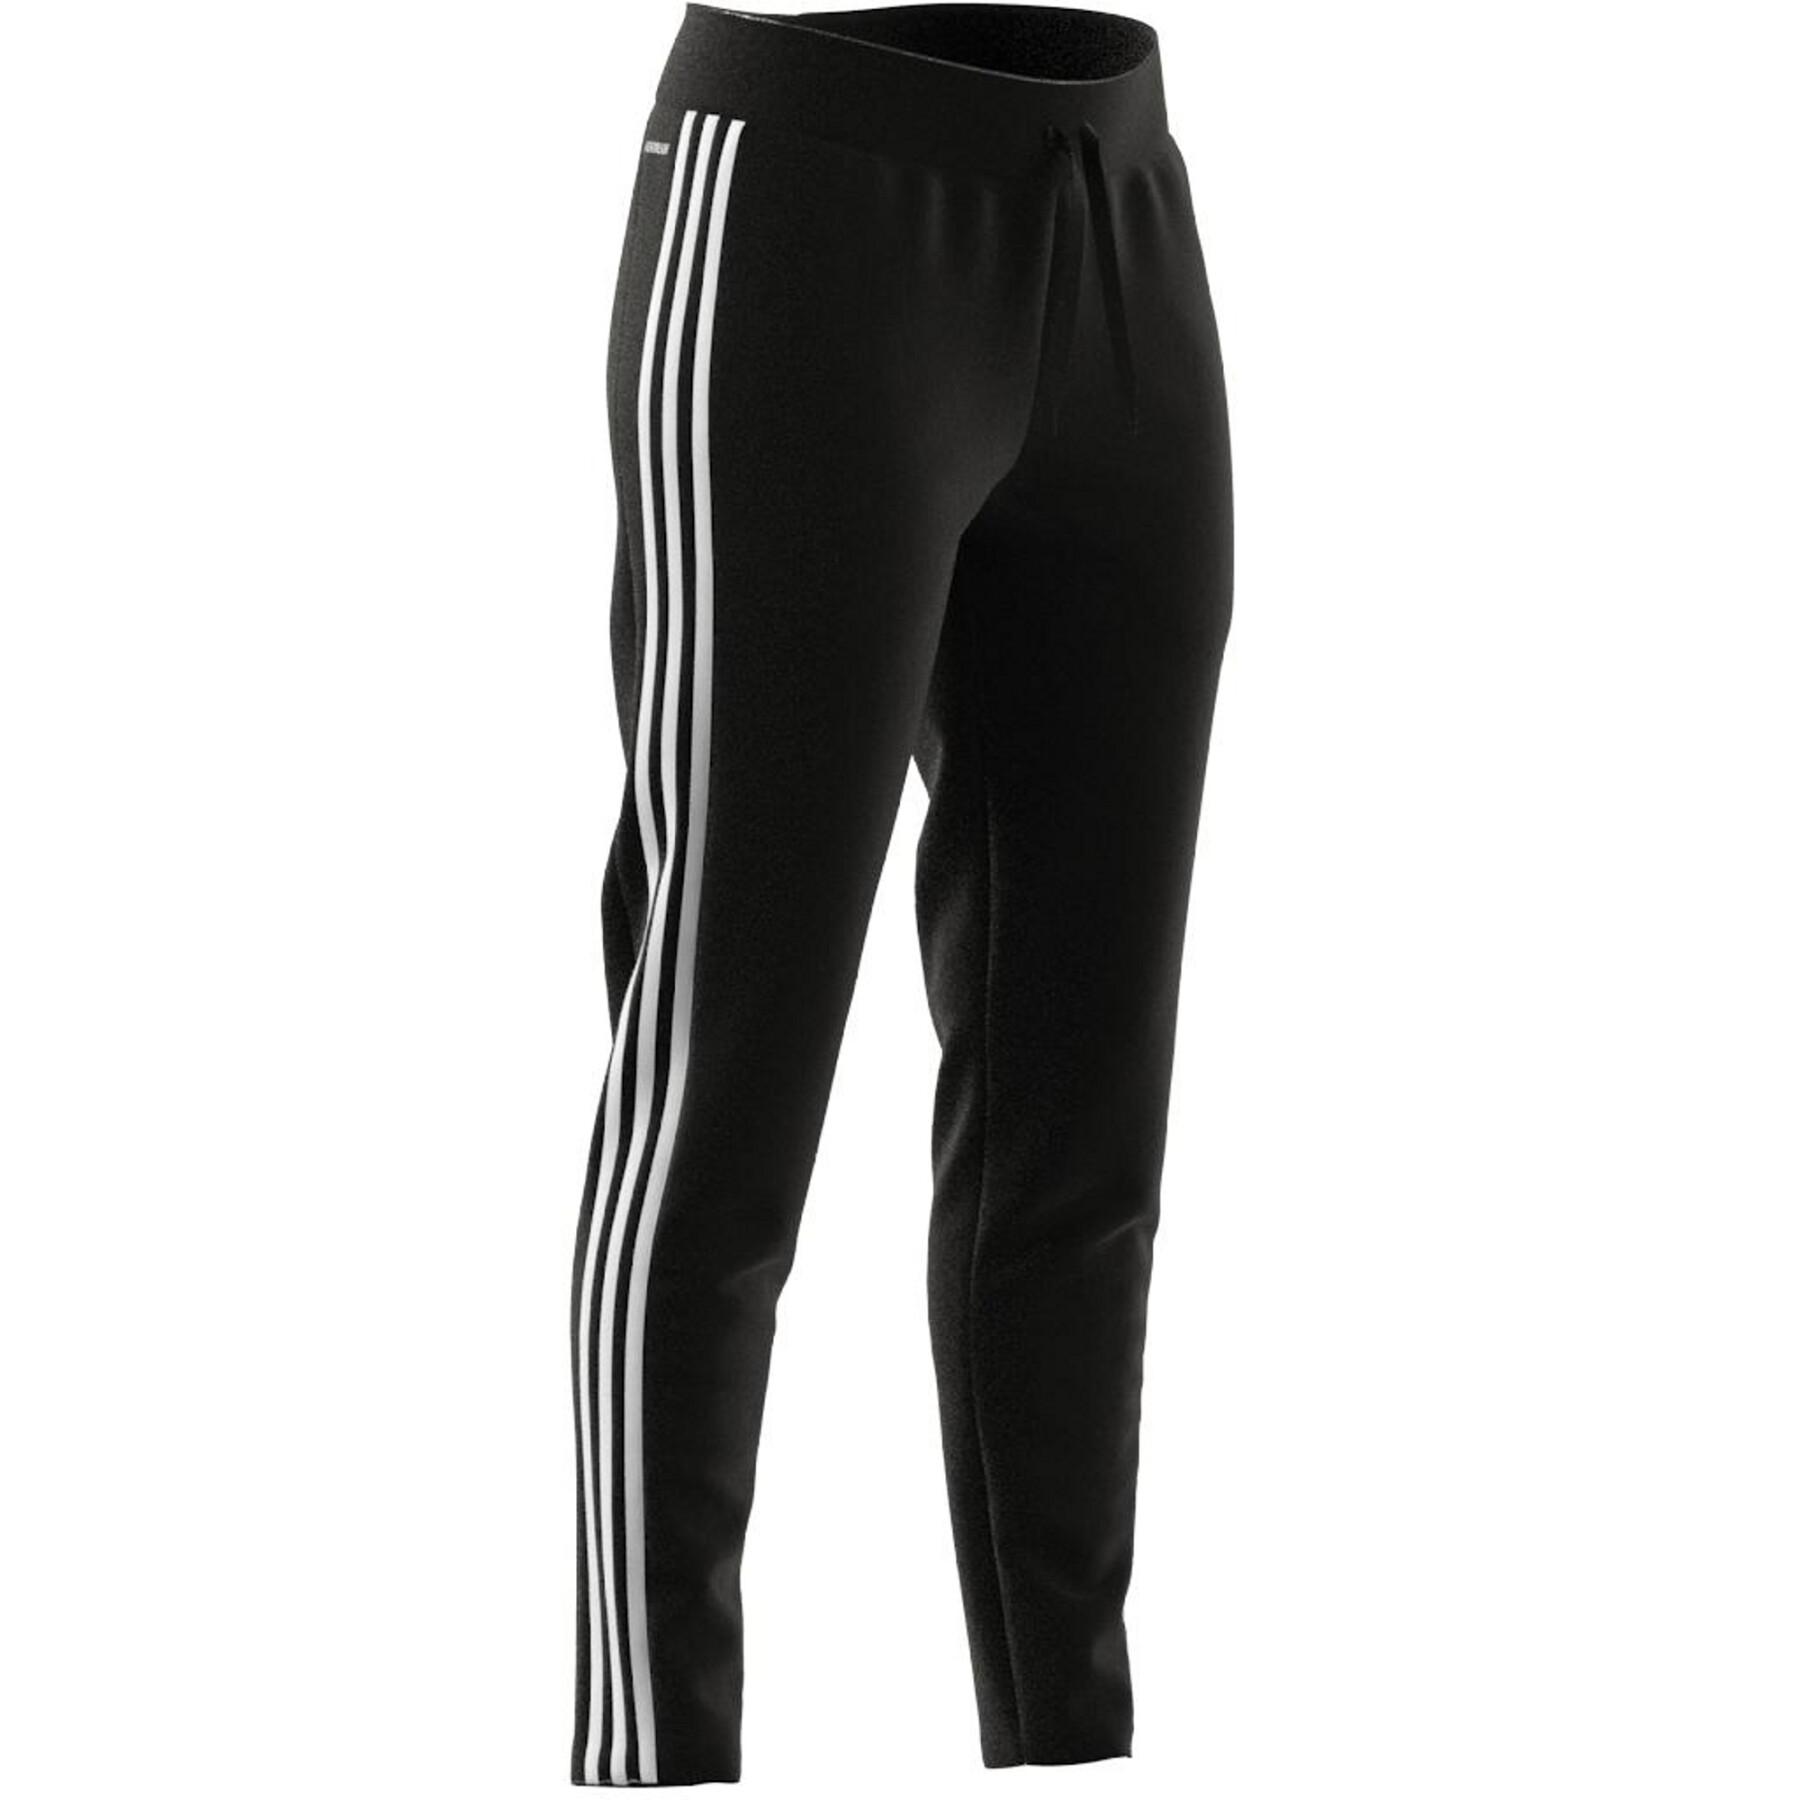 Women's 7/8 trousers adidas Designed 2 Move